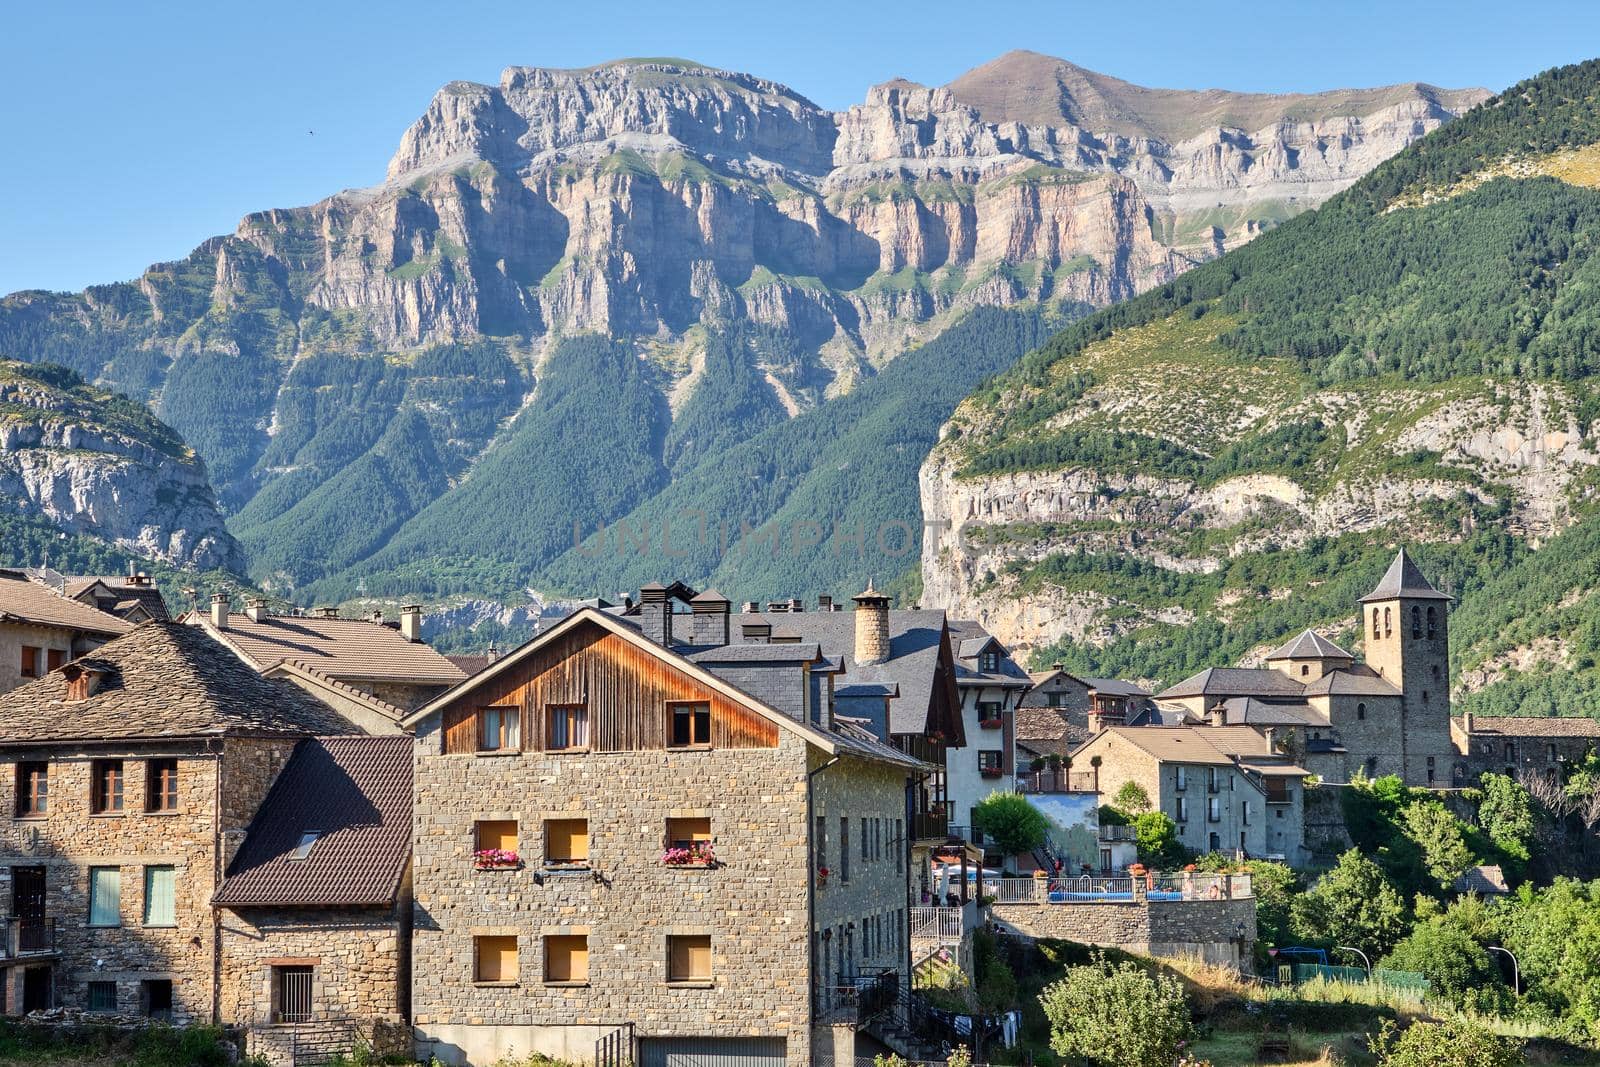 The beautiful old village of Torla in the Ordesa national park in the spanisch Pyrenees